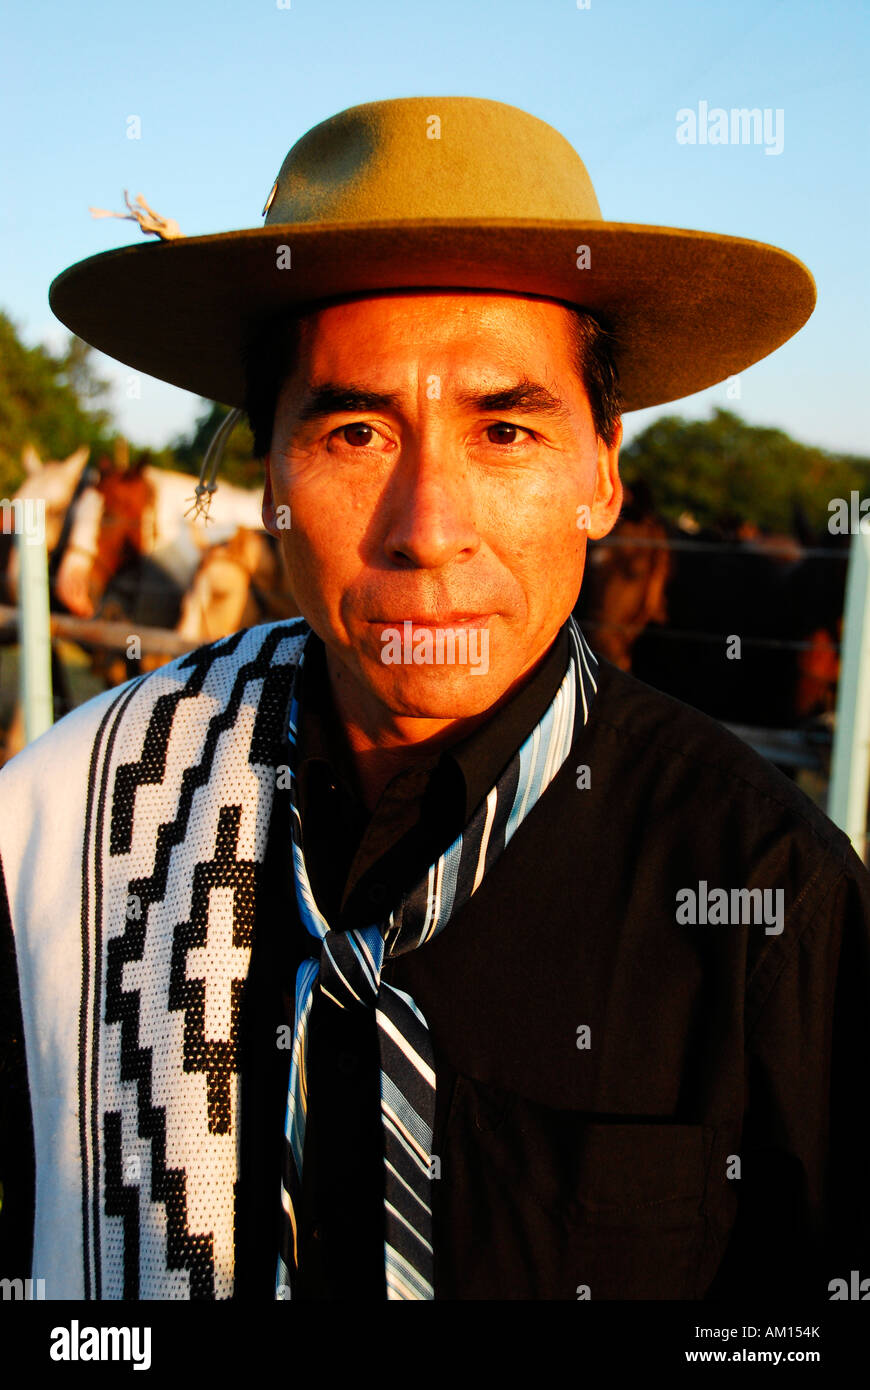 Gaucho with typical hat and scarf, Diamante, Entre Rios province, Argentina Stock Photo